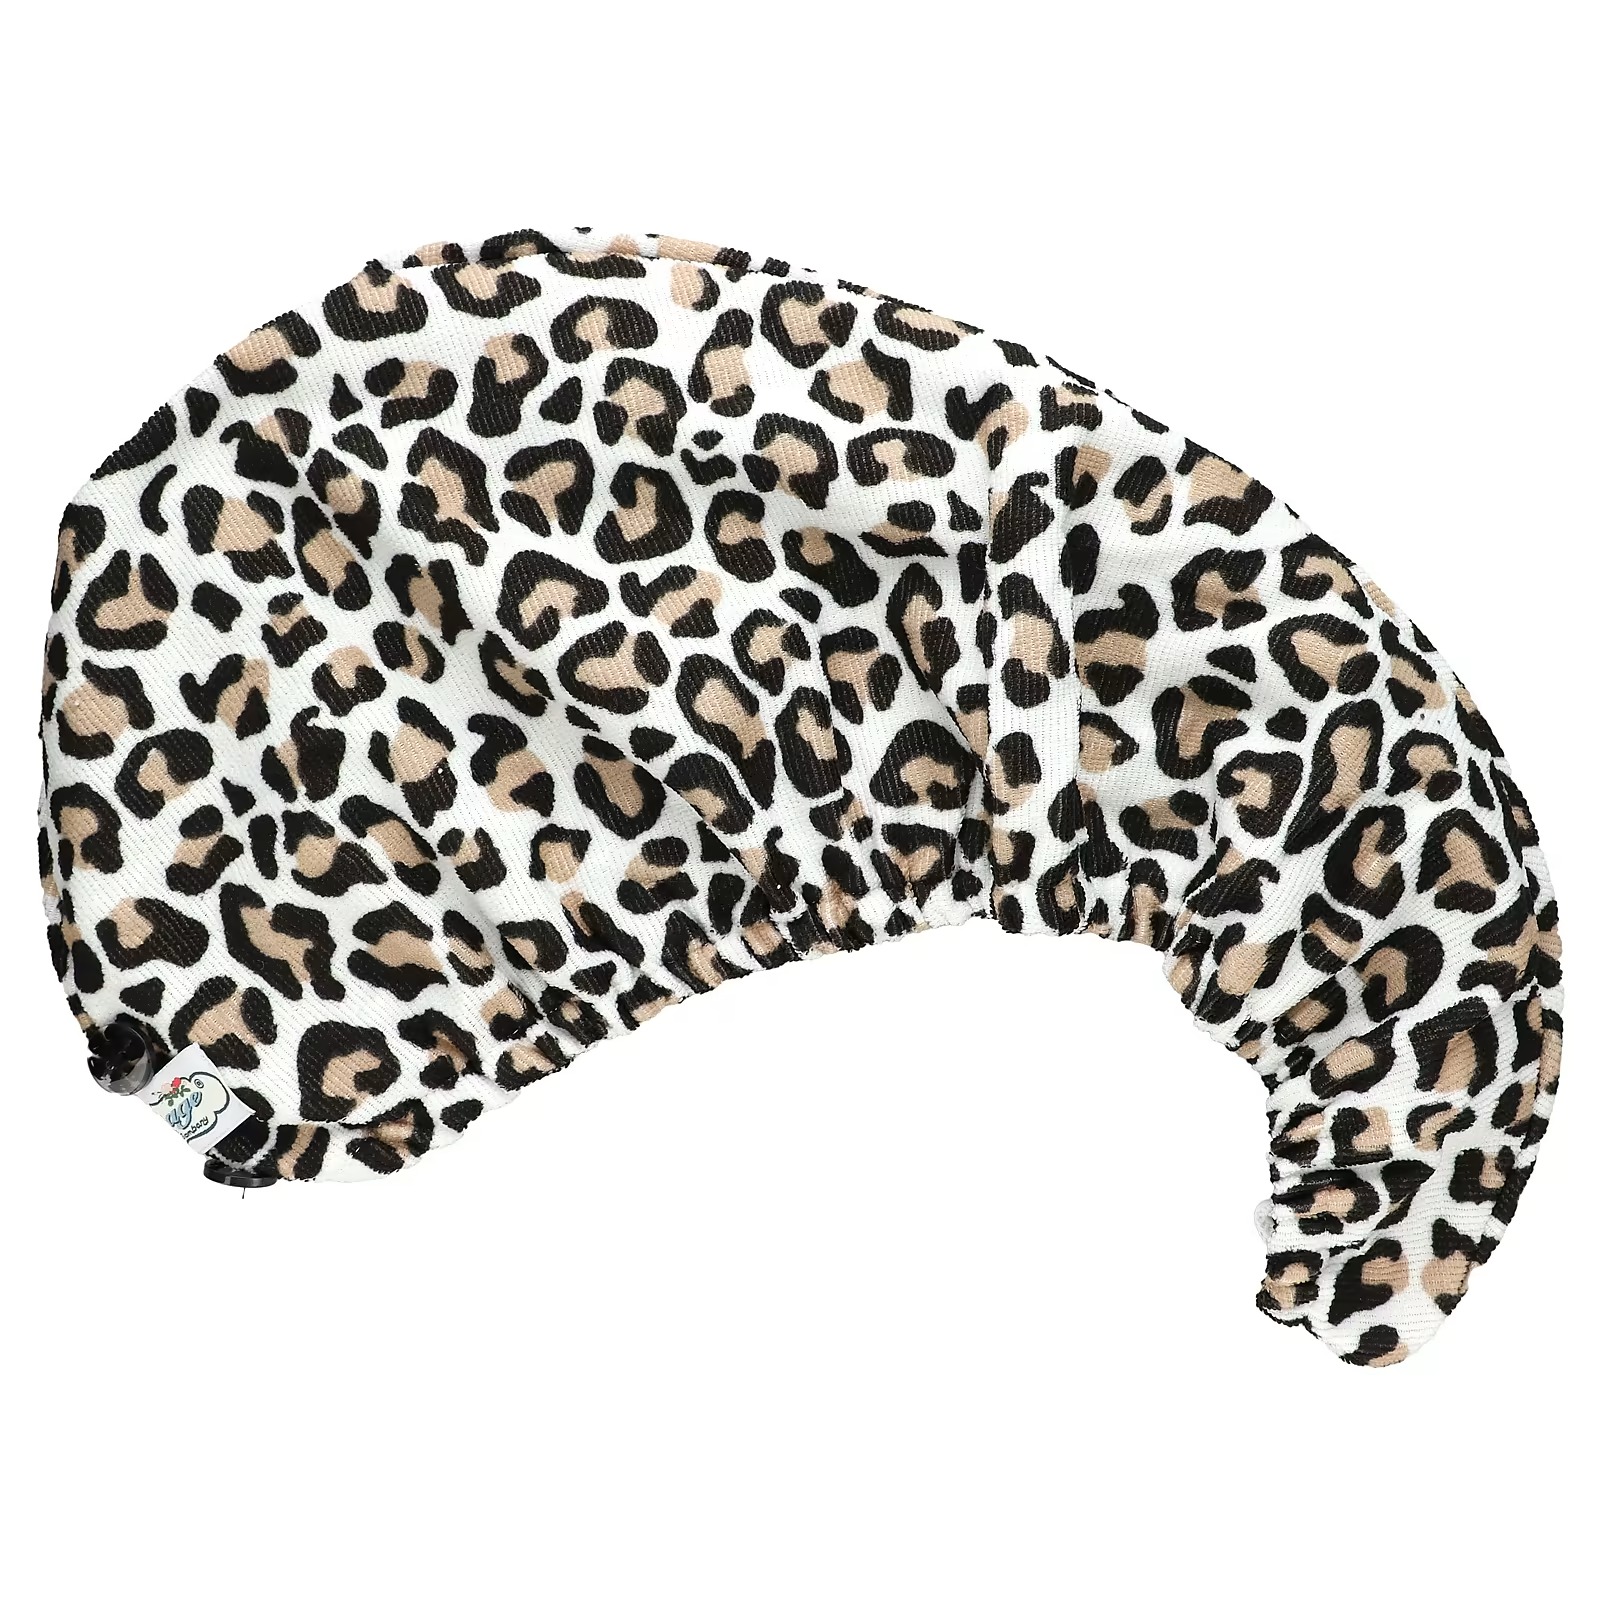 The Vintage Cosmetic Co., Тюрбан для волос, леопардовый, 1 шт. the vintage cosmetic co shower cap leopard print 1 count